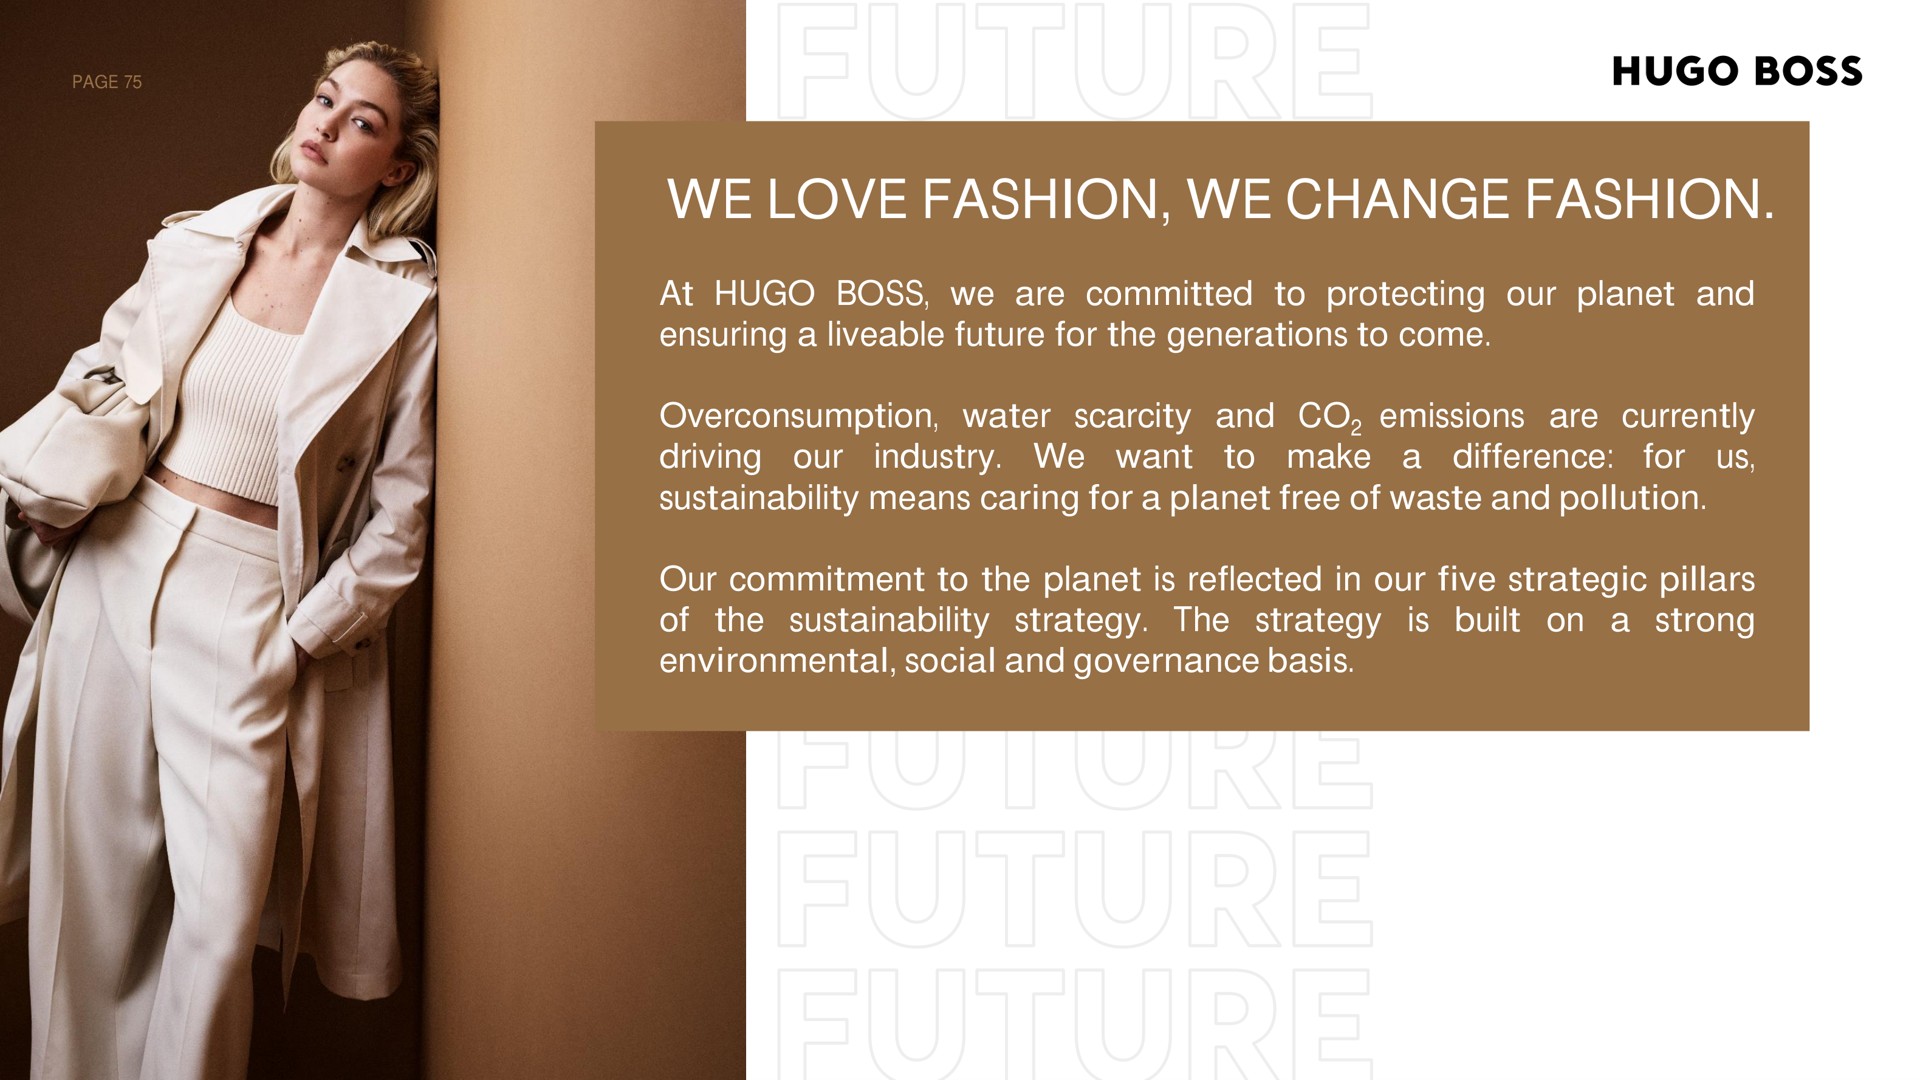 we love fashion we change fashion boss at boss are committed to protecting our planet and ensuring a future for the generations to come overconsumption water scarcity and emissions are currently us driving want difference industry make our for to a our commitment to the planet is reflected in our five strategic pillars a strong of environmental social and governance basis strategy the strategy built the on is | Hugo Boss